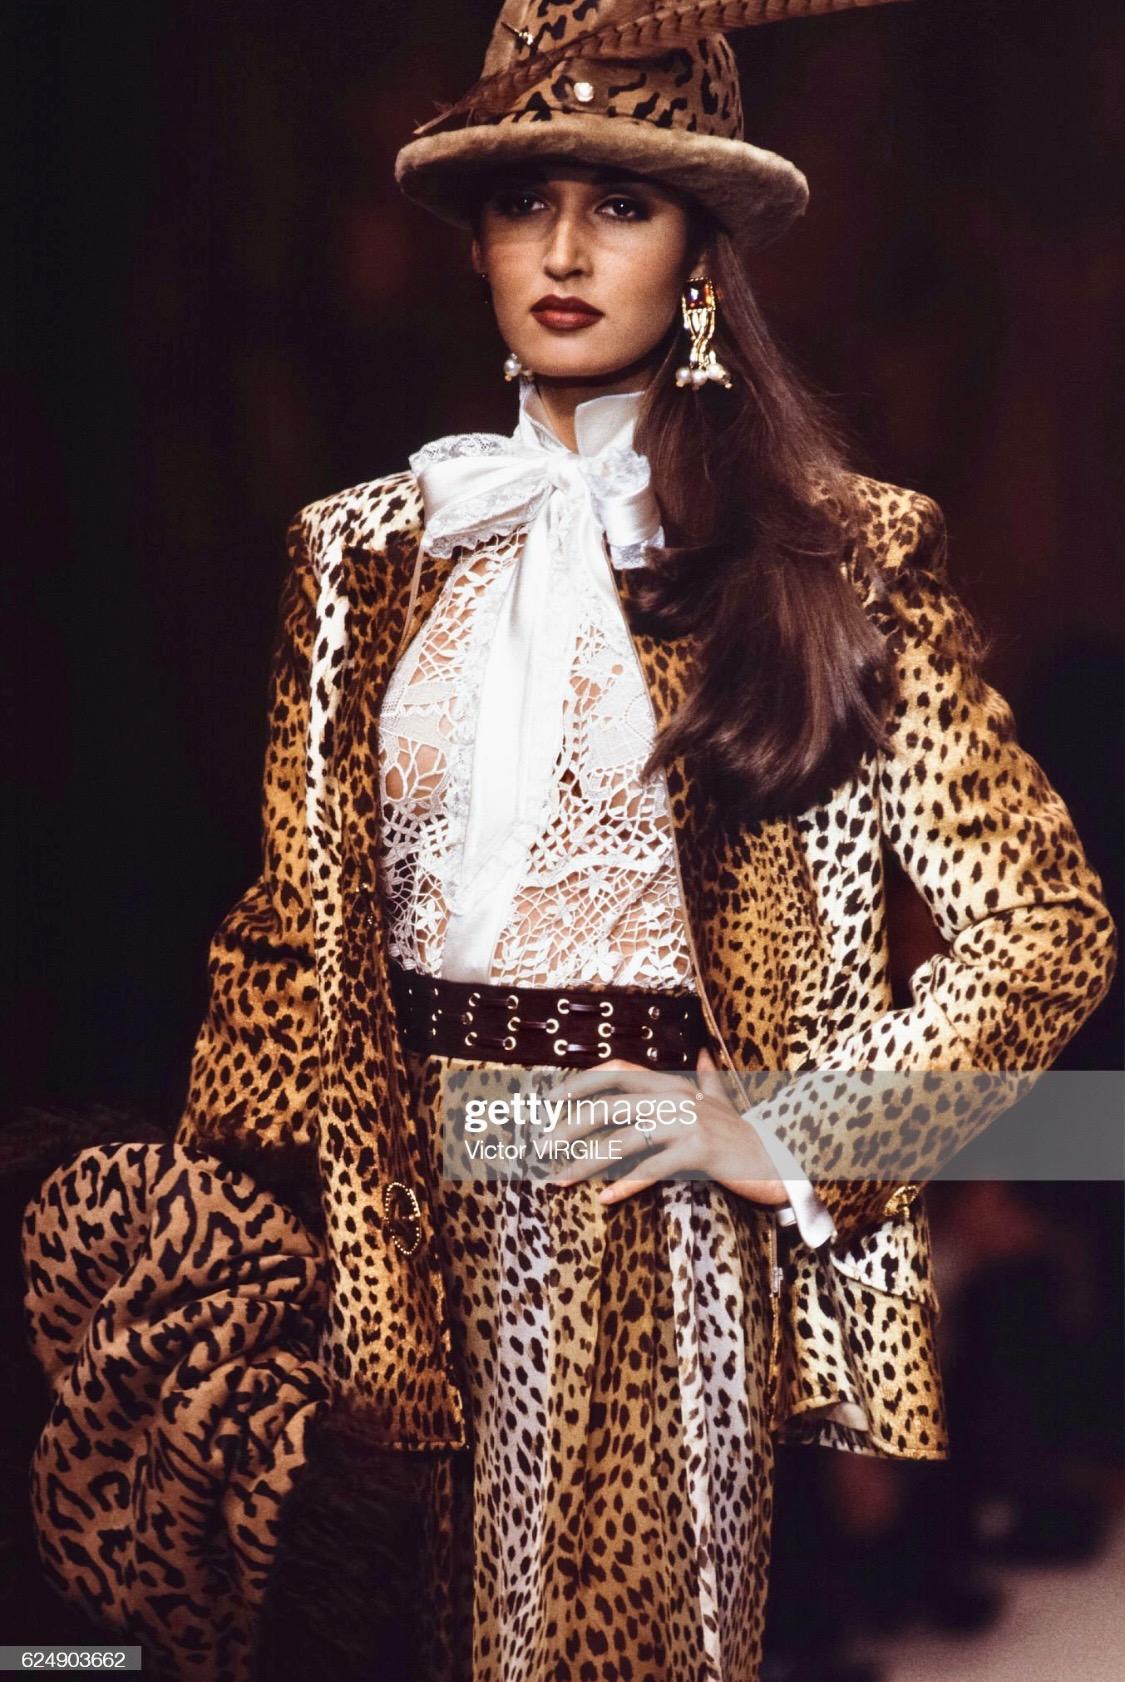 Presenting a fabulous cheetah print Valentino Boutique blazer. From the Fall/Winter 1992 collection, this stunning jacket debuted on the season's runway and is covered in cheetah print felt fabric. The blazer is made complete with gold-tone brooches